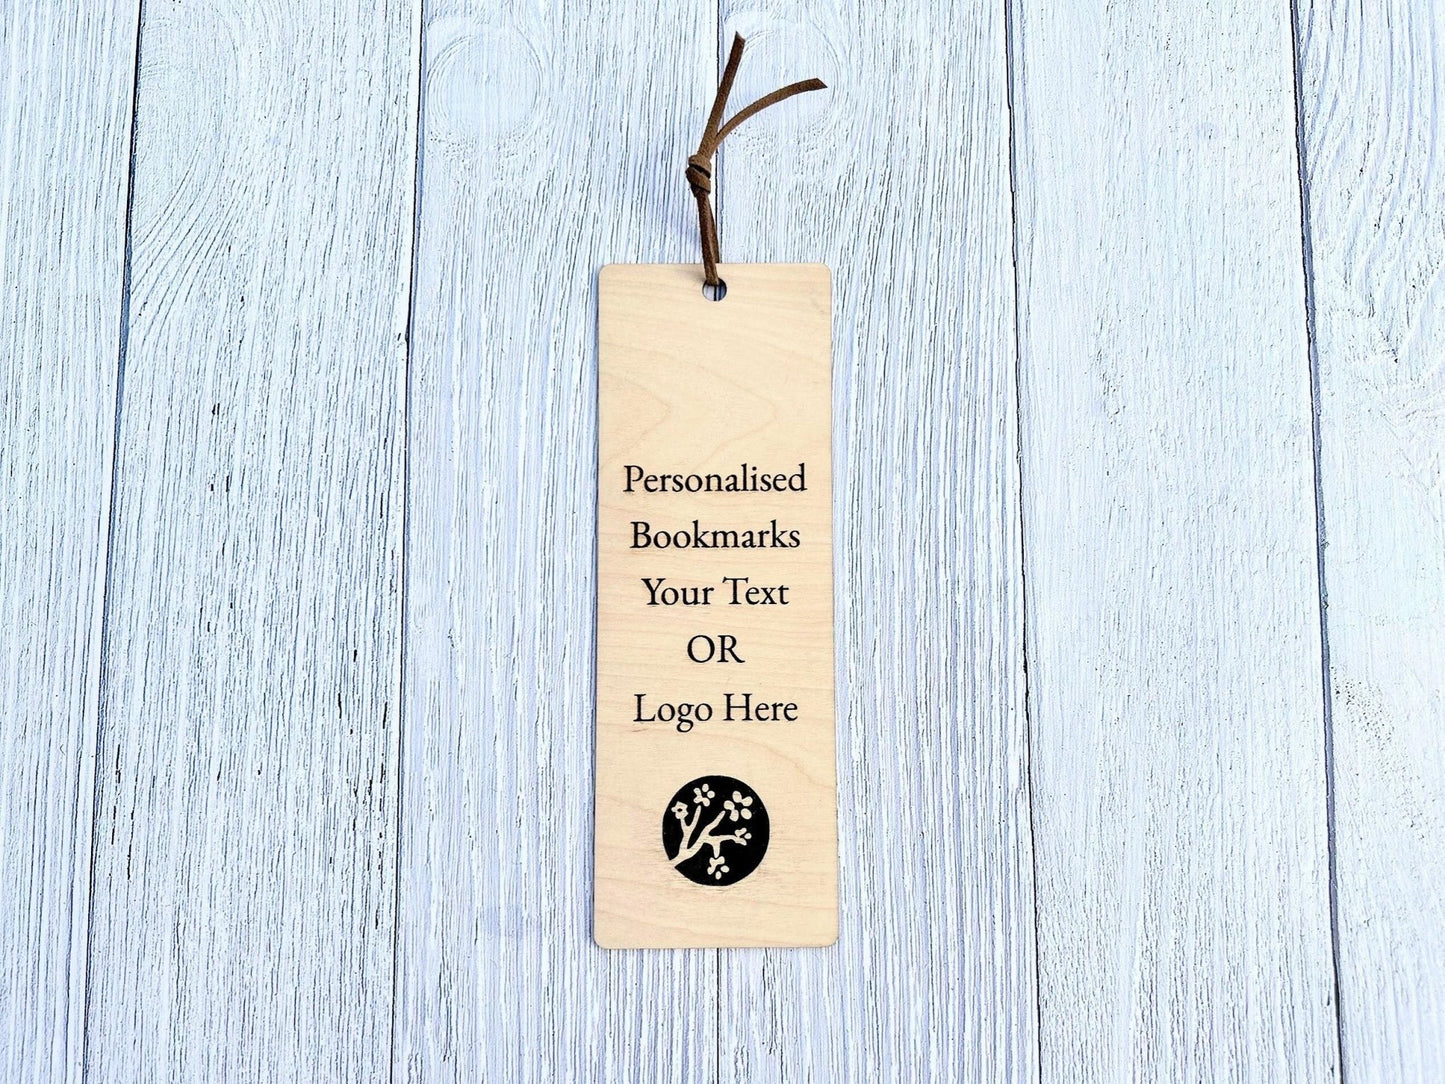 Personalised Engraved Wooden Book Mark | Logo Engraved Bookmark | Wrapping Ideas | Custom Book Mark | Corporate Gifts | Branded Bookmark - CherryGroveCraft